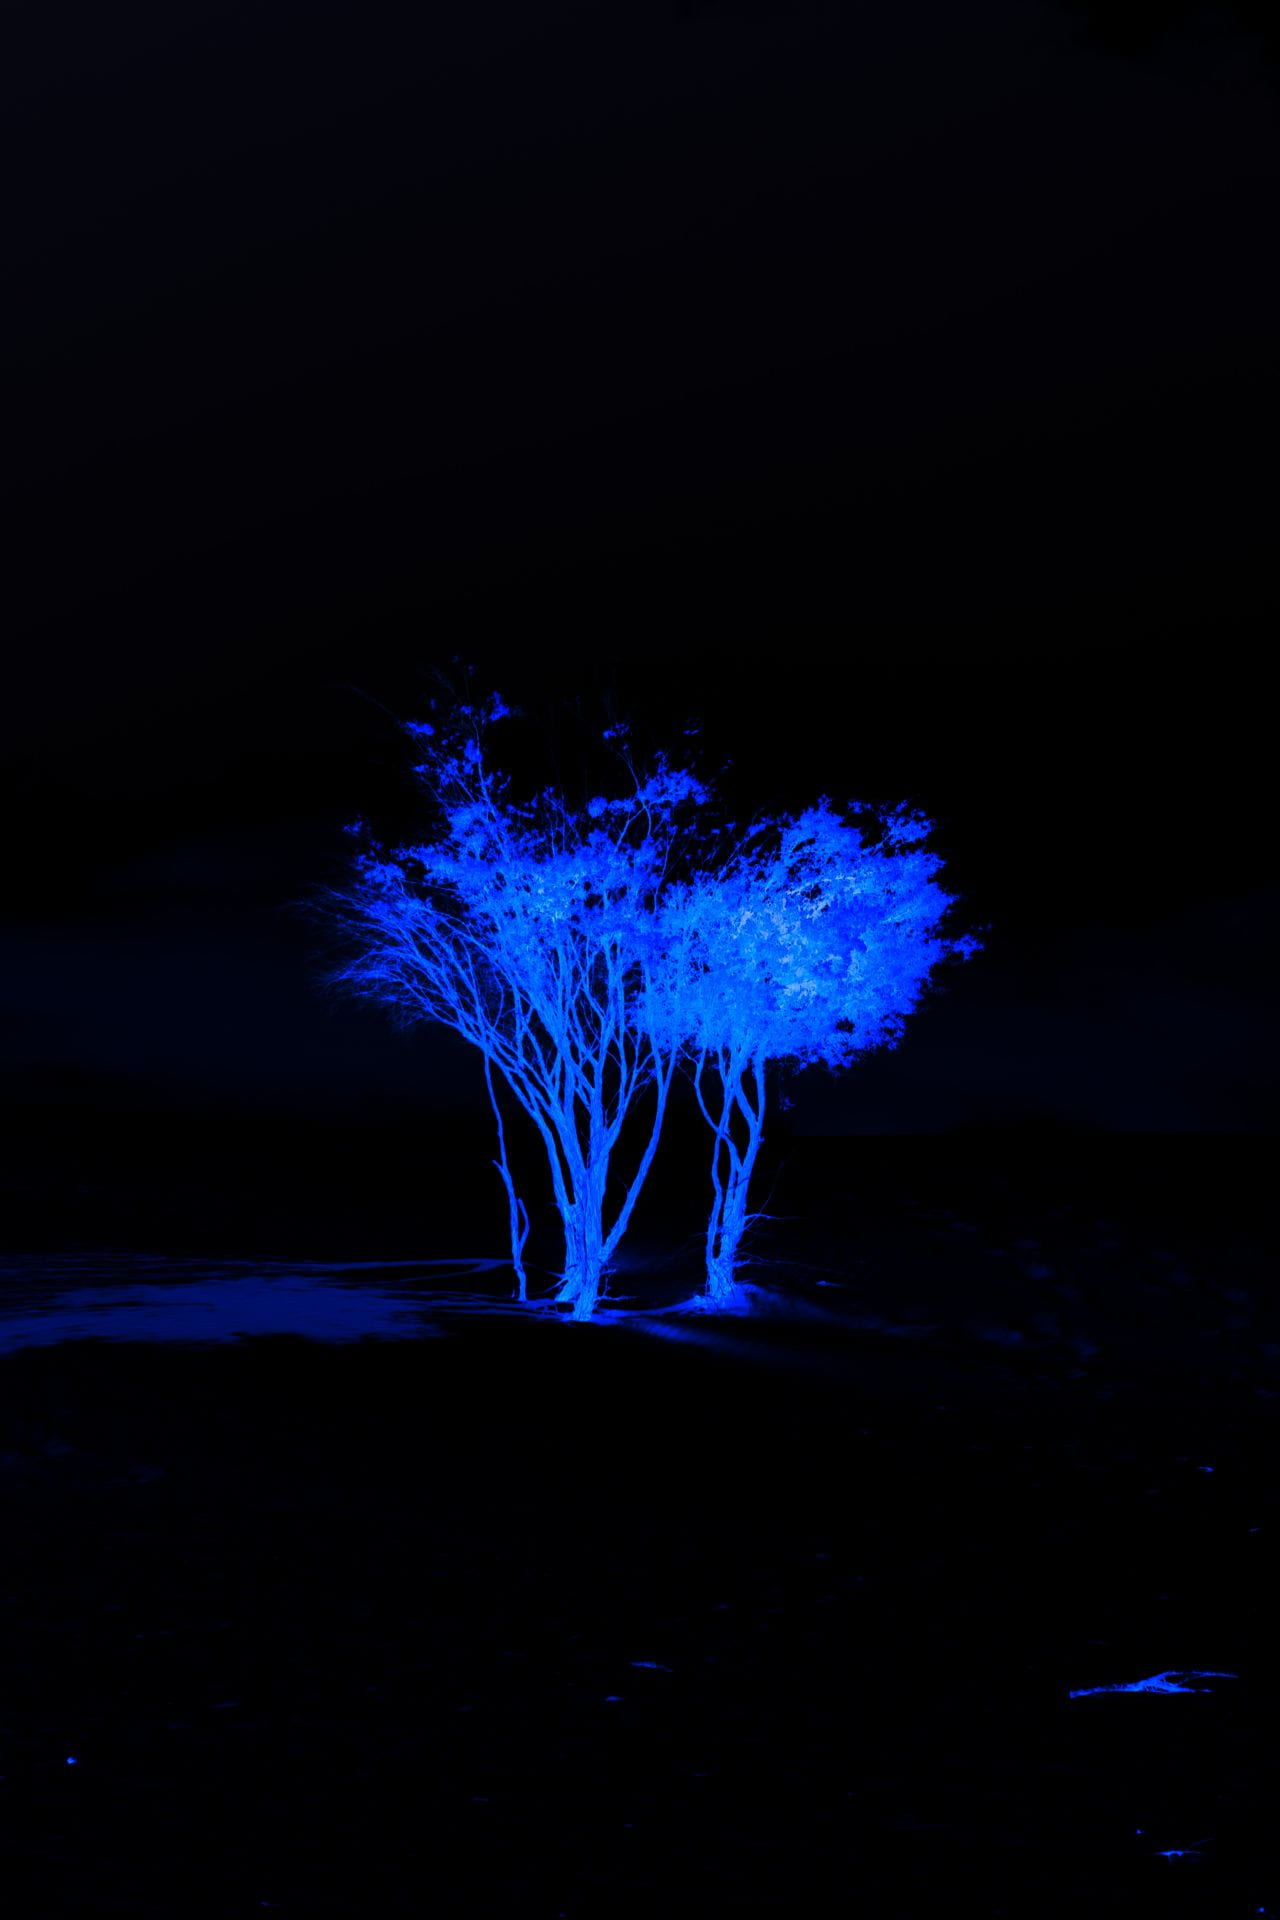 night photograph of a tree